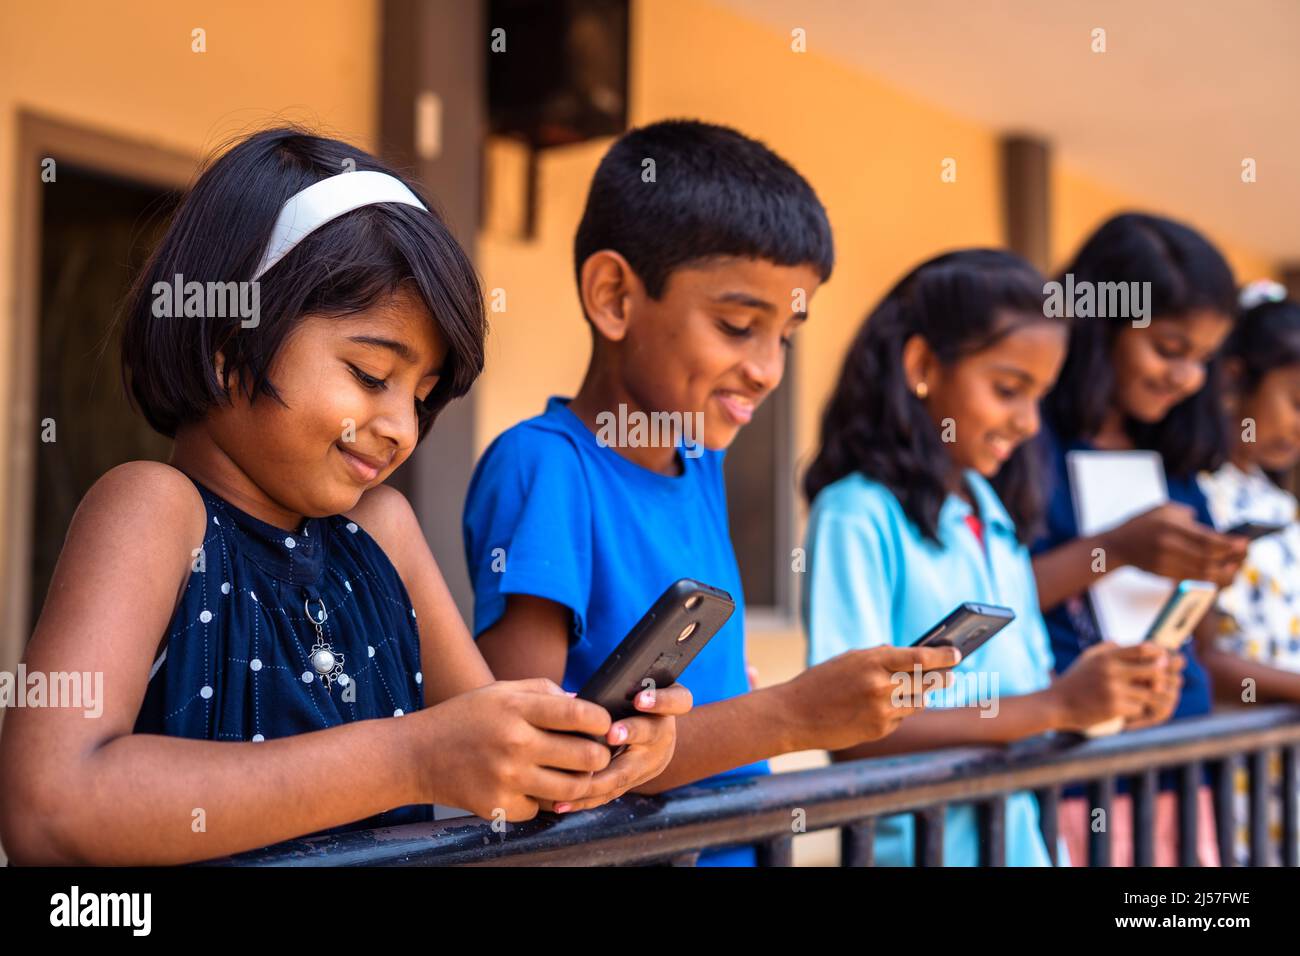 Group of kids busy using mobile phone at school corridor - concept of socil media, smartphone technology and gaming addiction Stock Photo